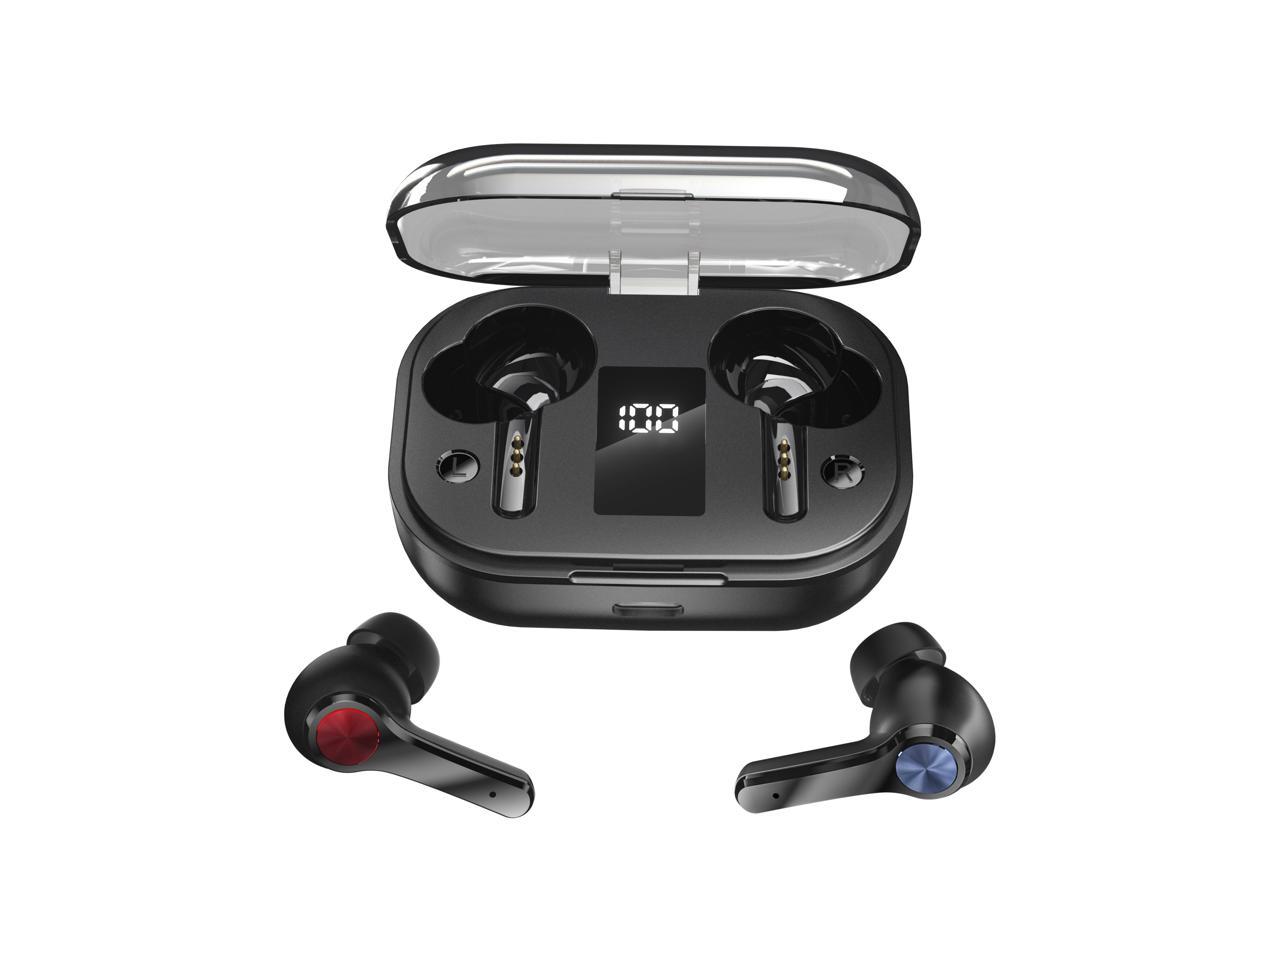 Black Built-in Microphone One-Step Pairing Wireless Earphones Bluetooth Wirelesss Earbuds Bluetooth 5.1 Headsets with 3D Stereo Sound for Sports Work Office 